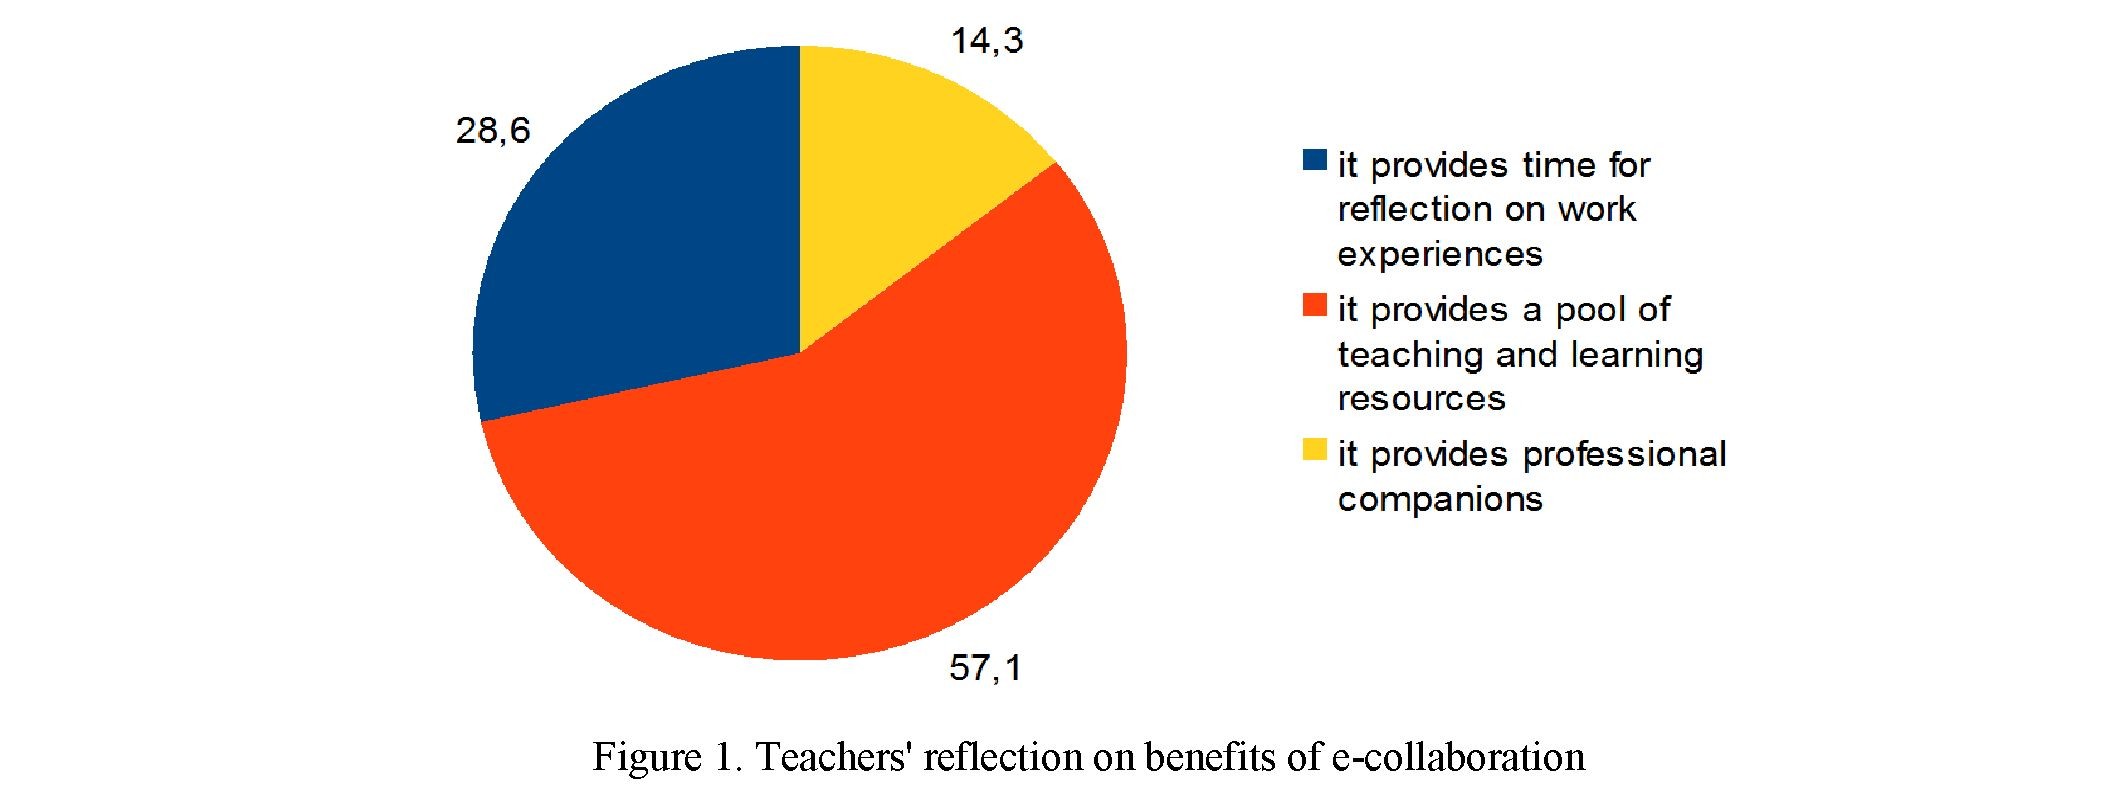 Gains of e-collaboration in professional engagement initiatives